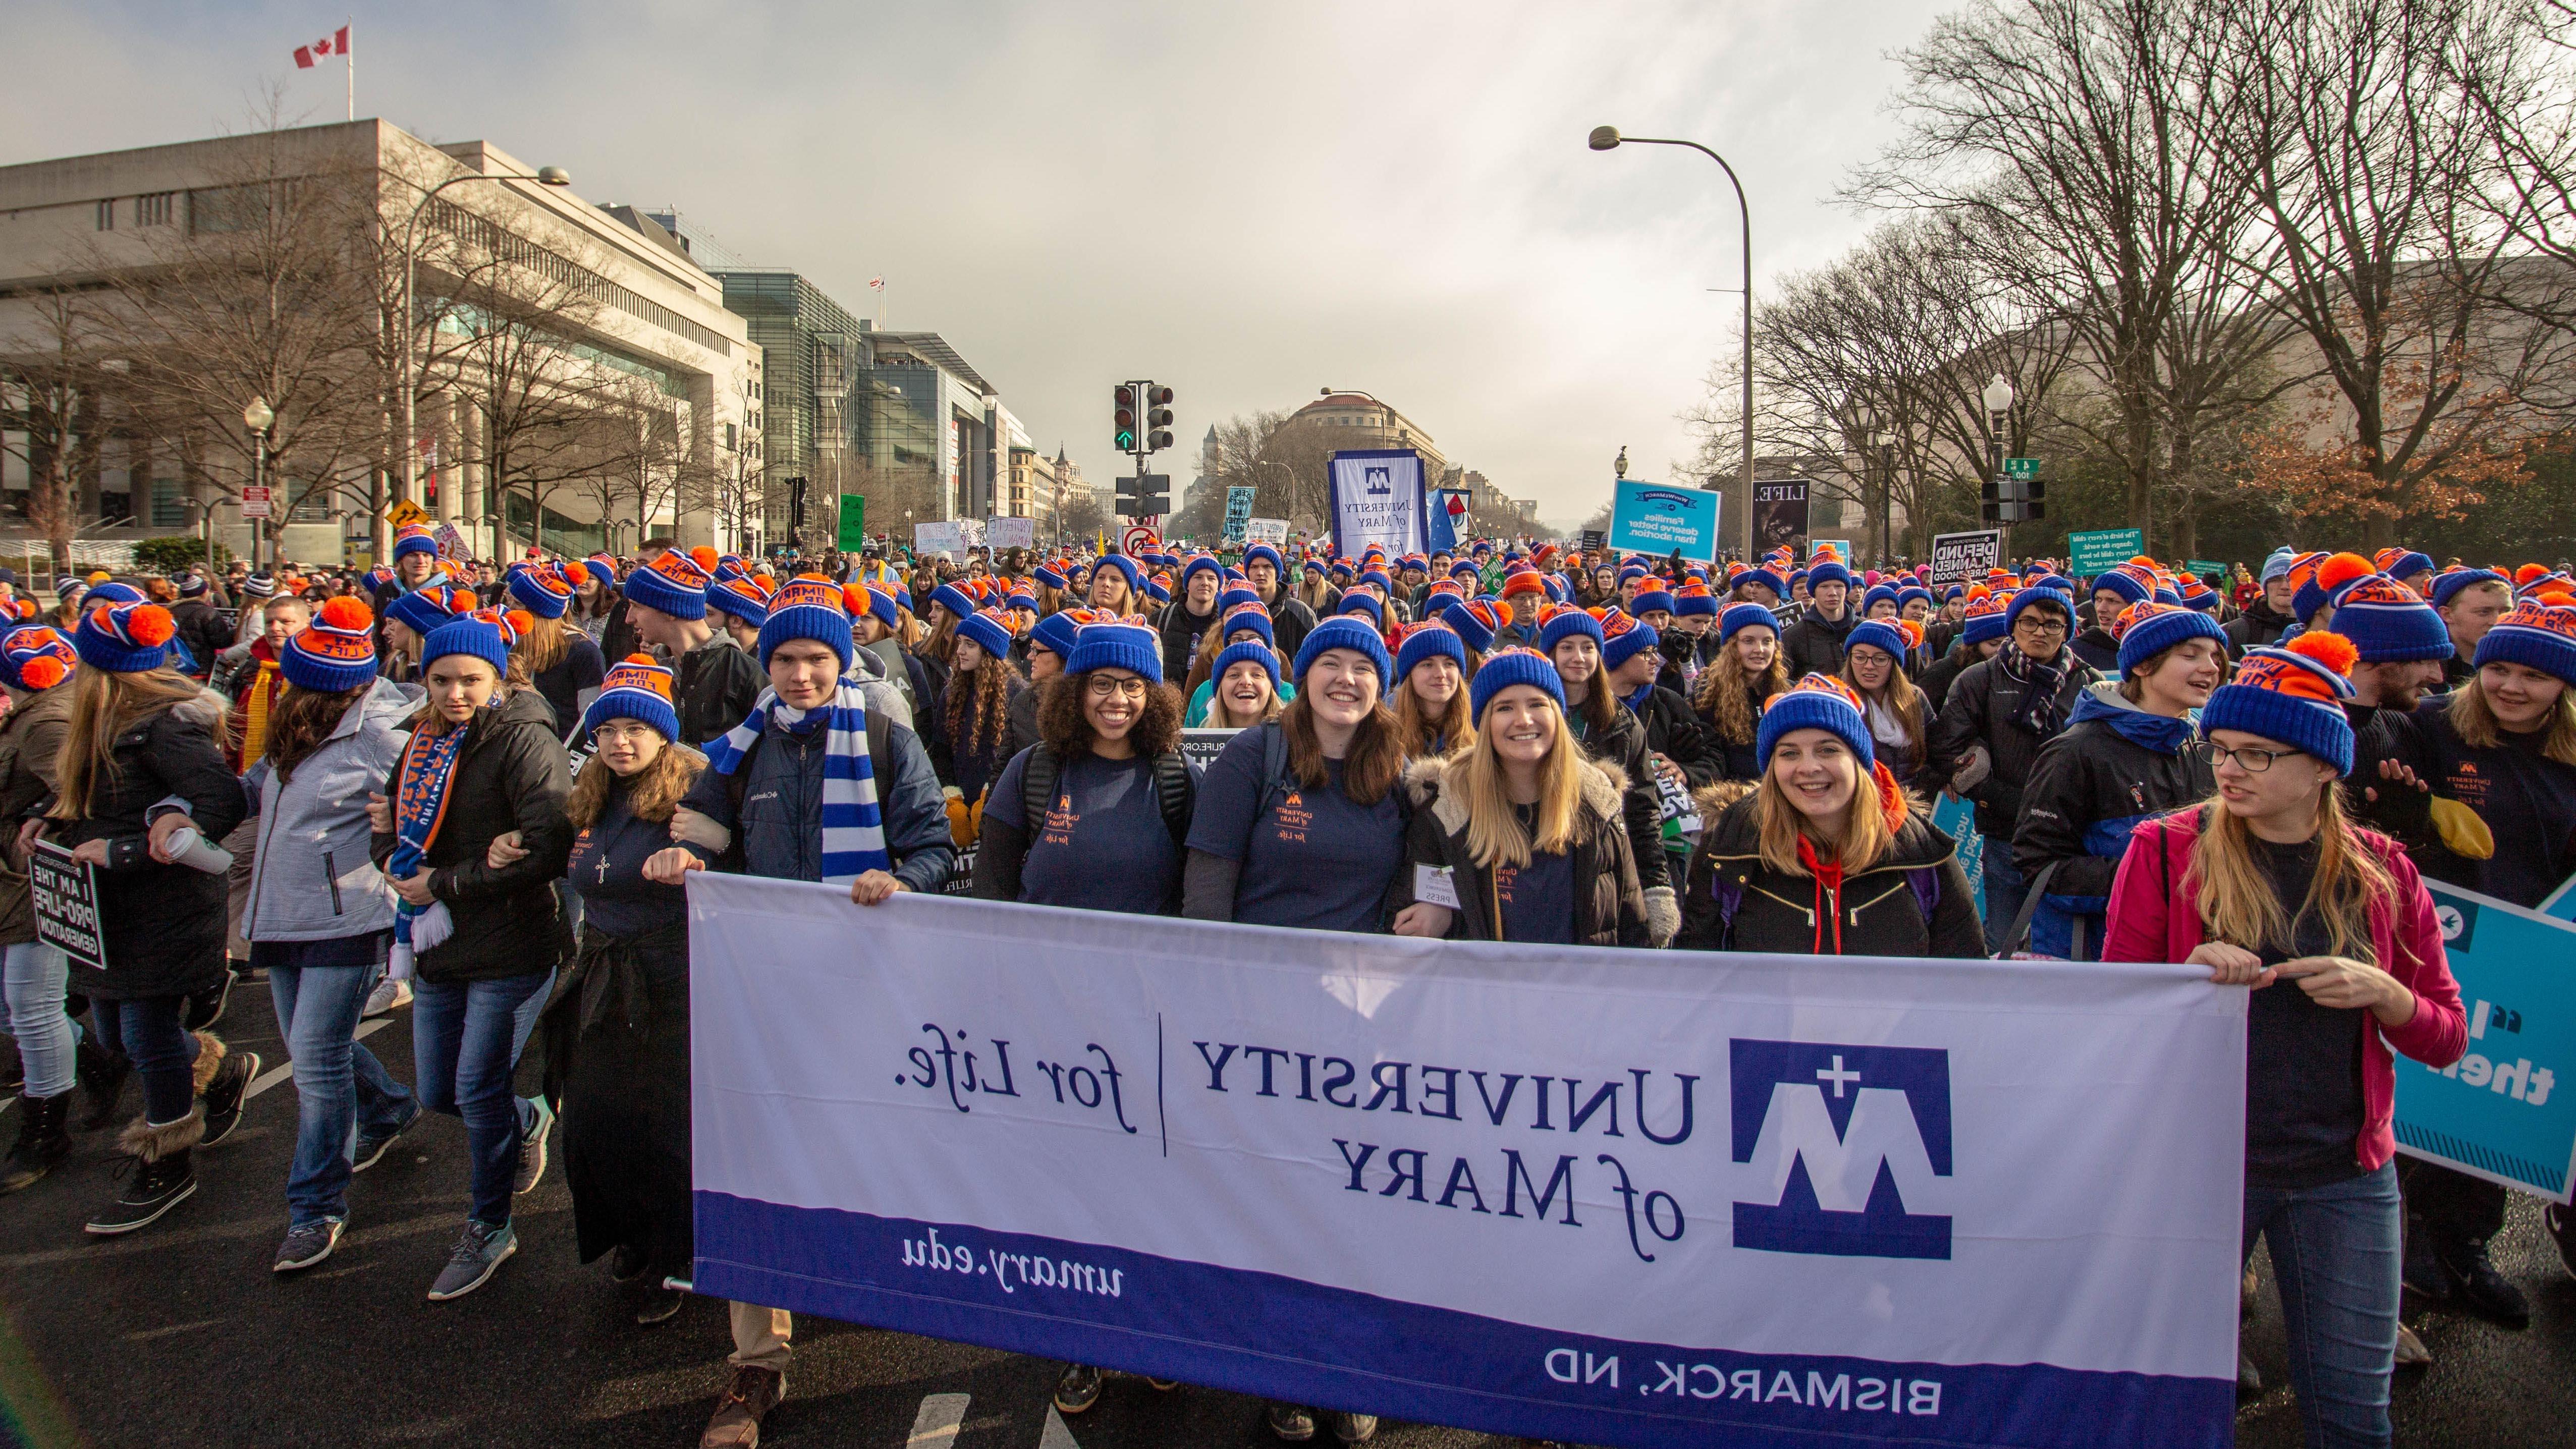 A group of University of Mary students at the national March for Life.